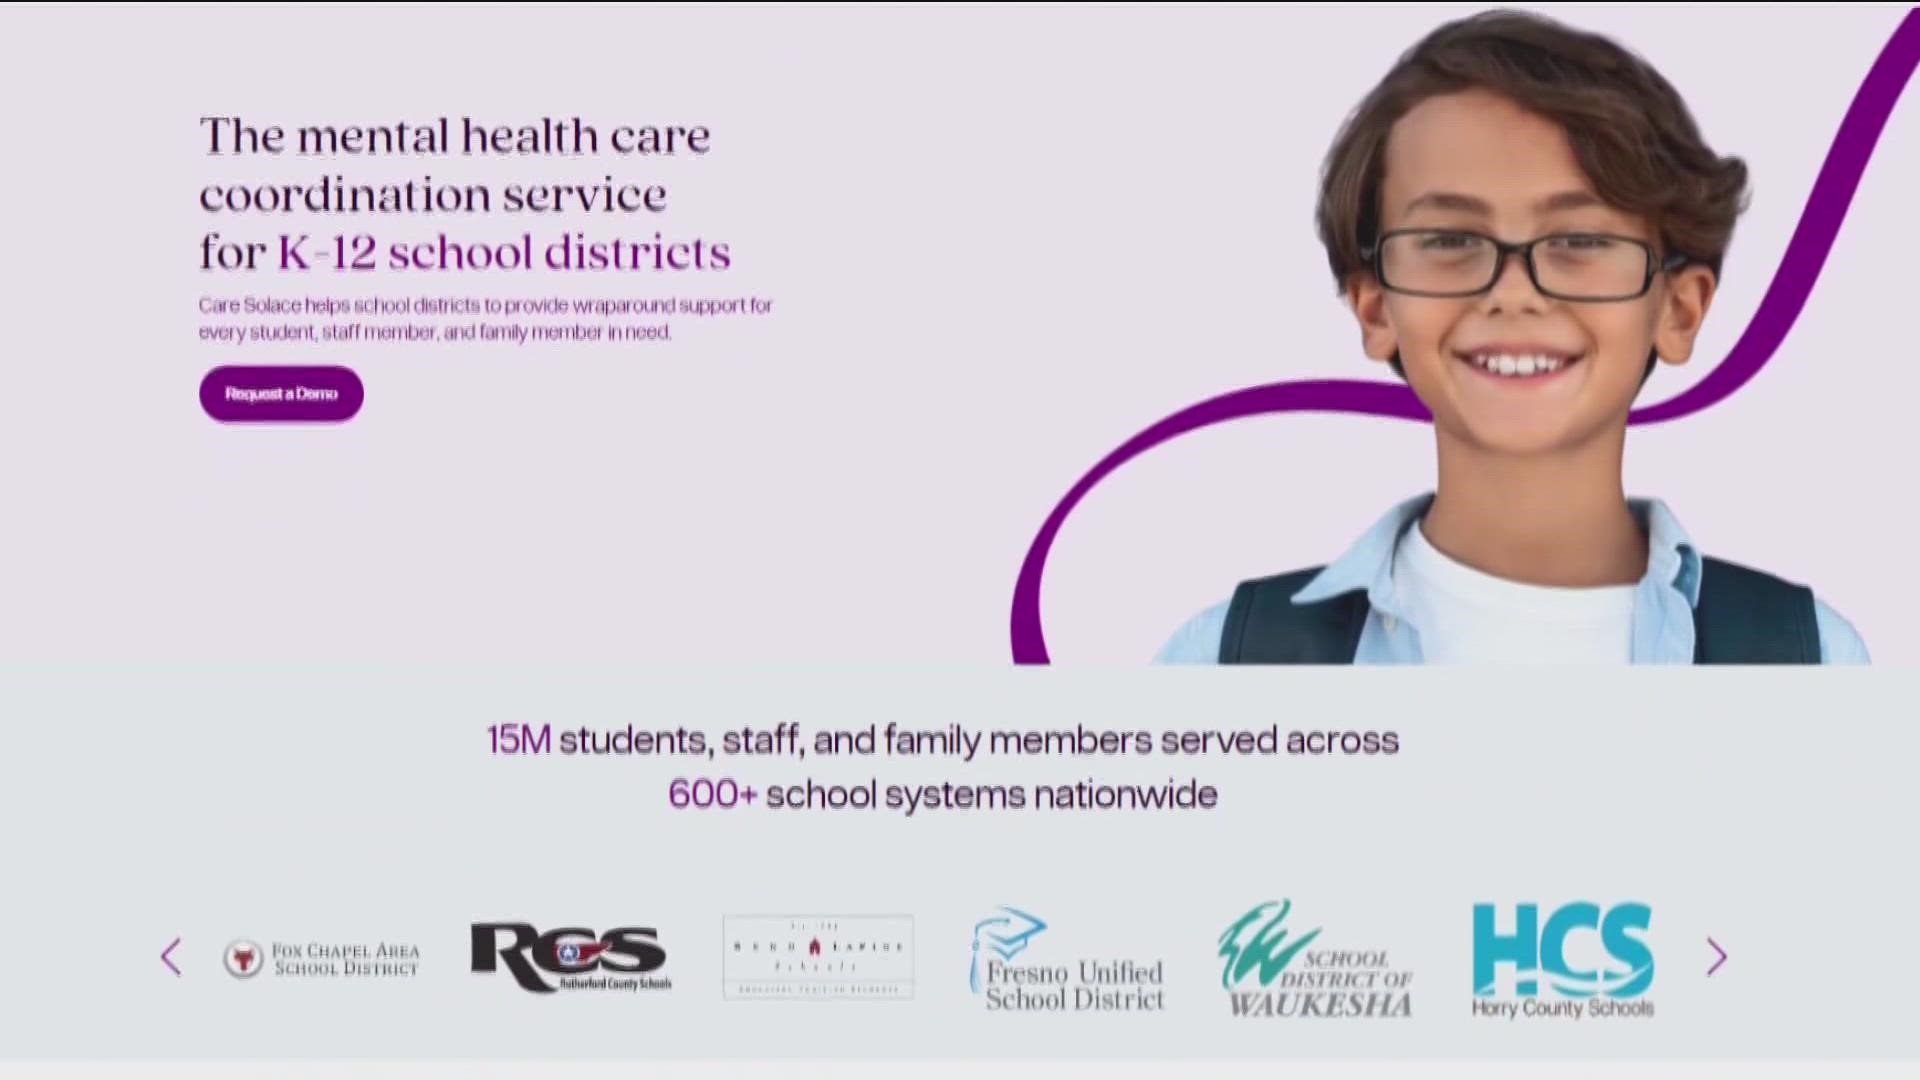 Students and parents can find and connect with providers through a website or on phone with a health care navigator.